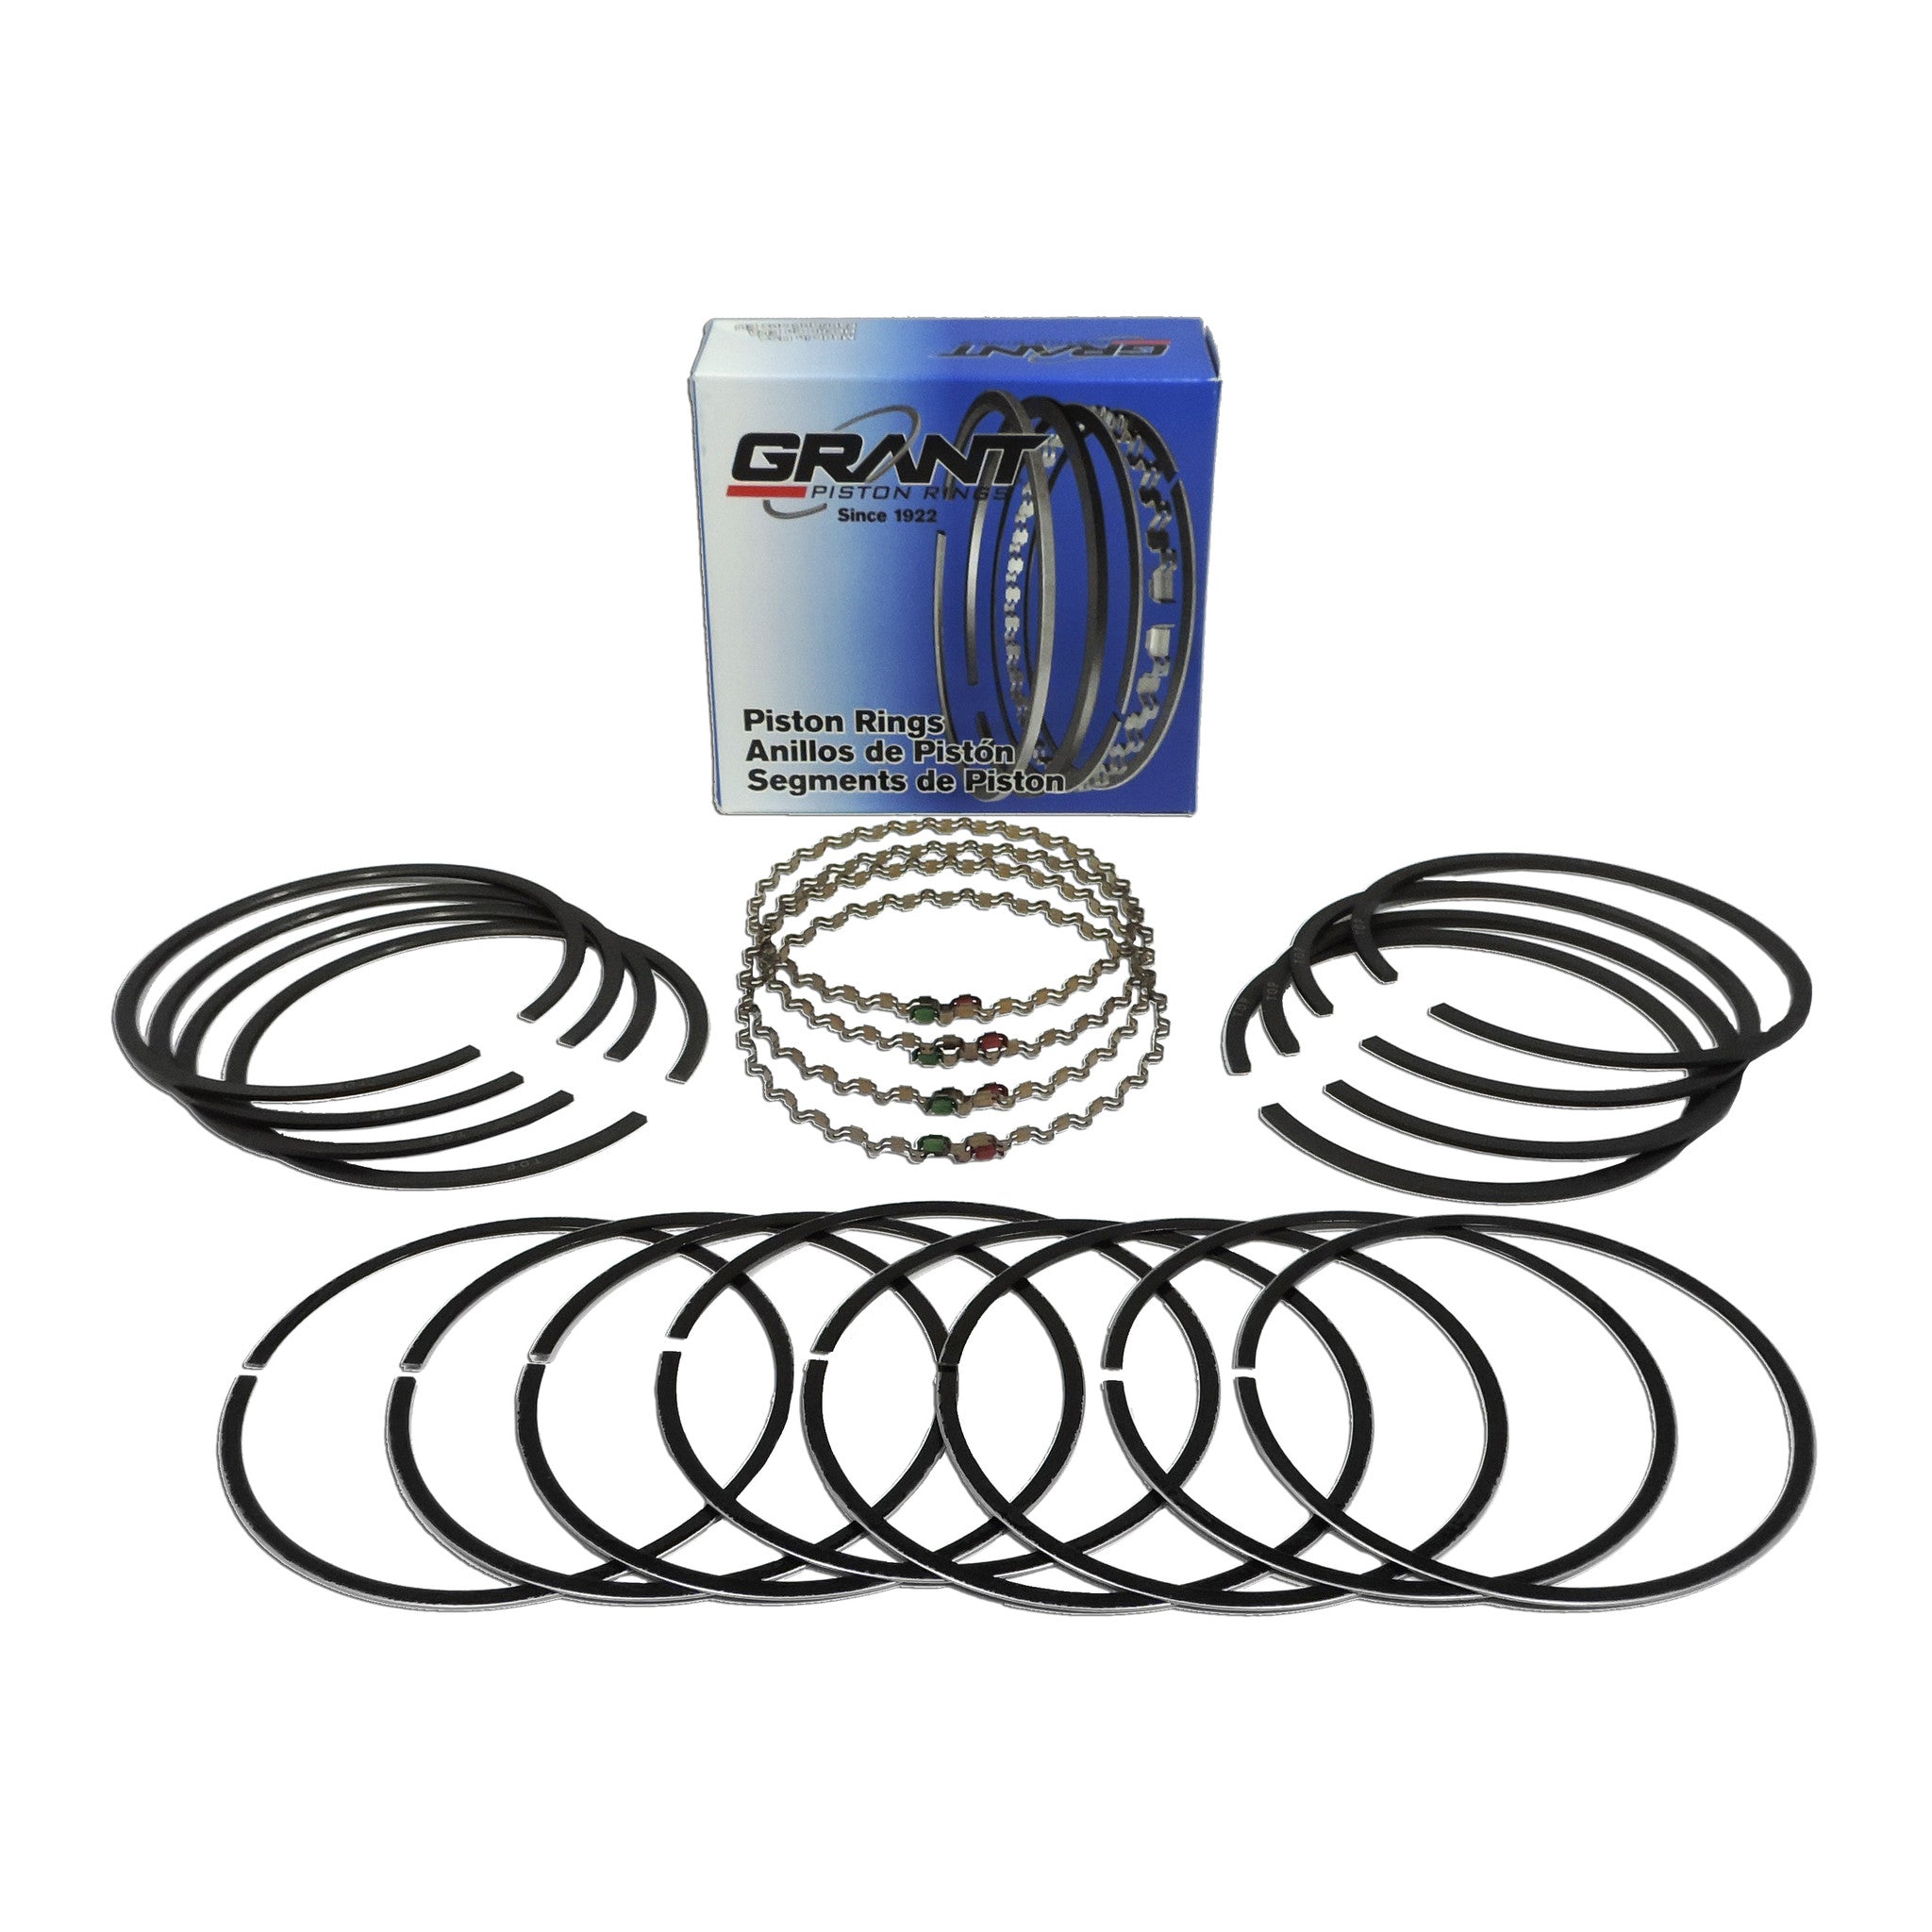 VWC-311-198-169-A - PISTON RING COMPLETE SET - ( ALL RINGS FOR 1 ENGINE)  85.5MM 1600CC - BEETLE/GHIA/TYPE-3 70-79 - BUS